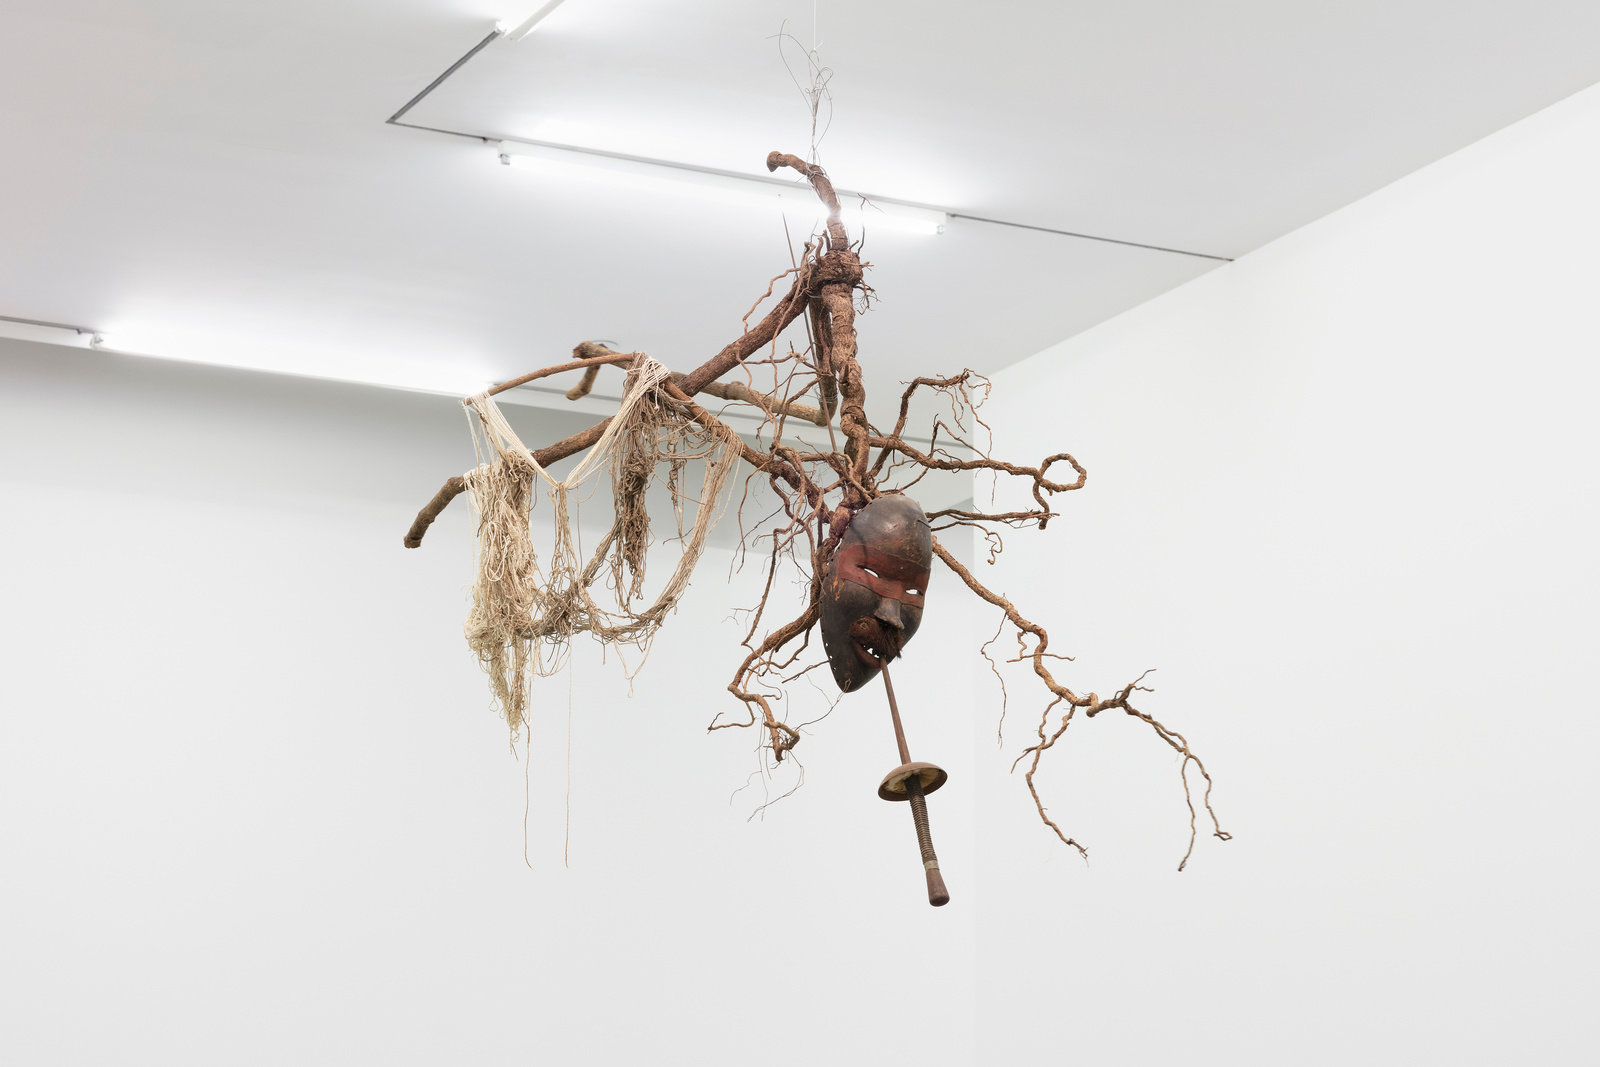 A sculpture by Lonnie Hollie composed of tree roots, an African mask, fencing foil, twine and wire. Suspended from a gallery ceiling, tree roots form an anthropomorphic like figure. An African mask hangs down from the primary root with the end of a fencing foil in its mouth.